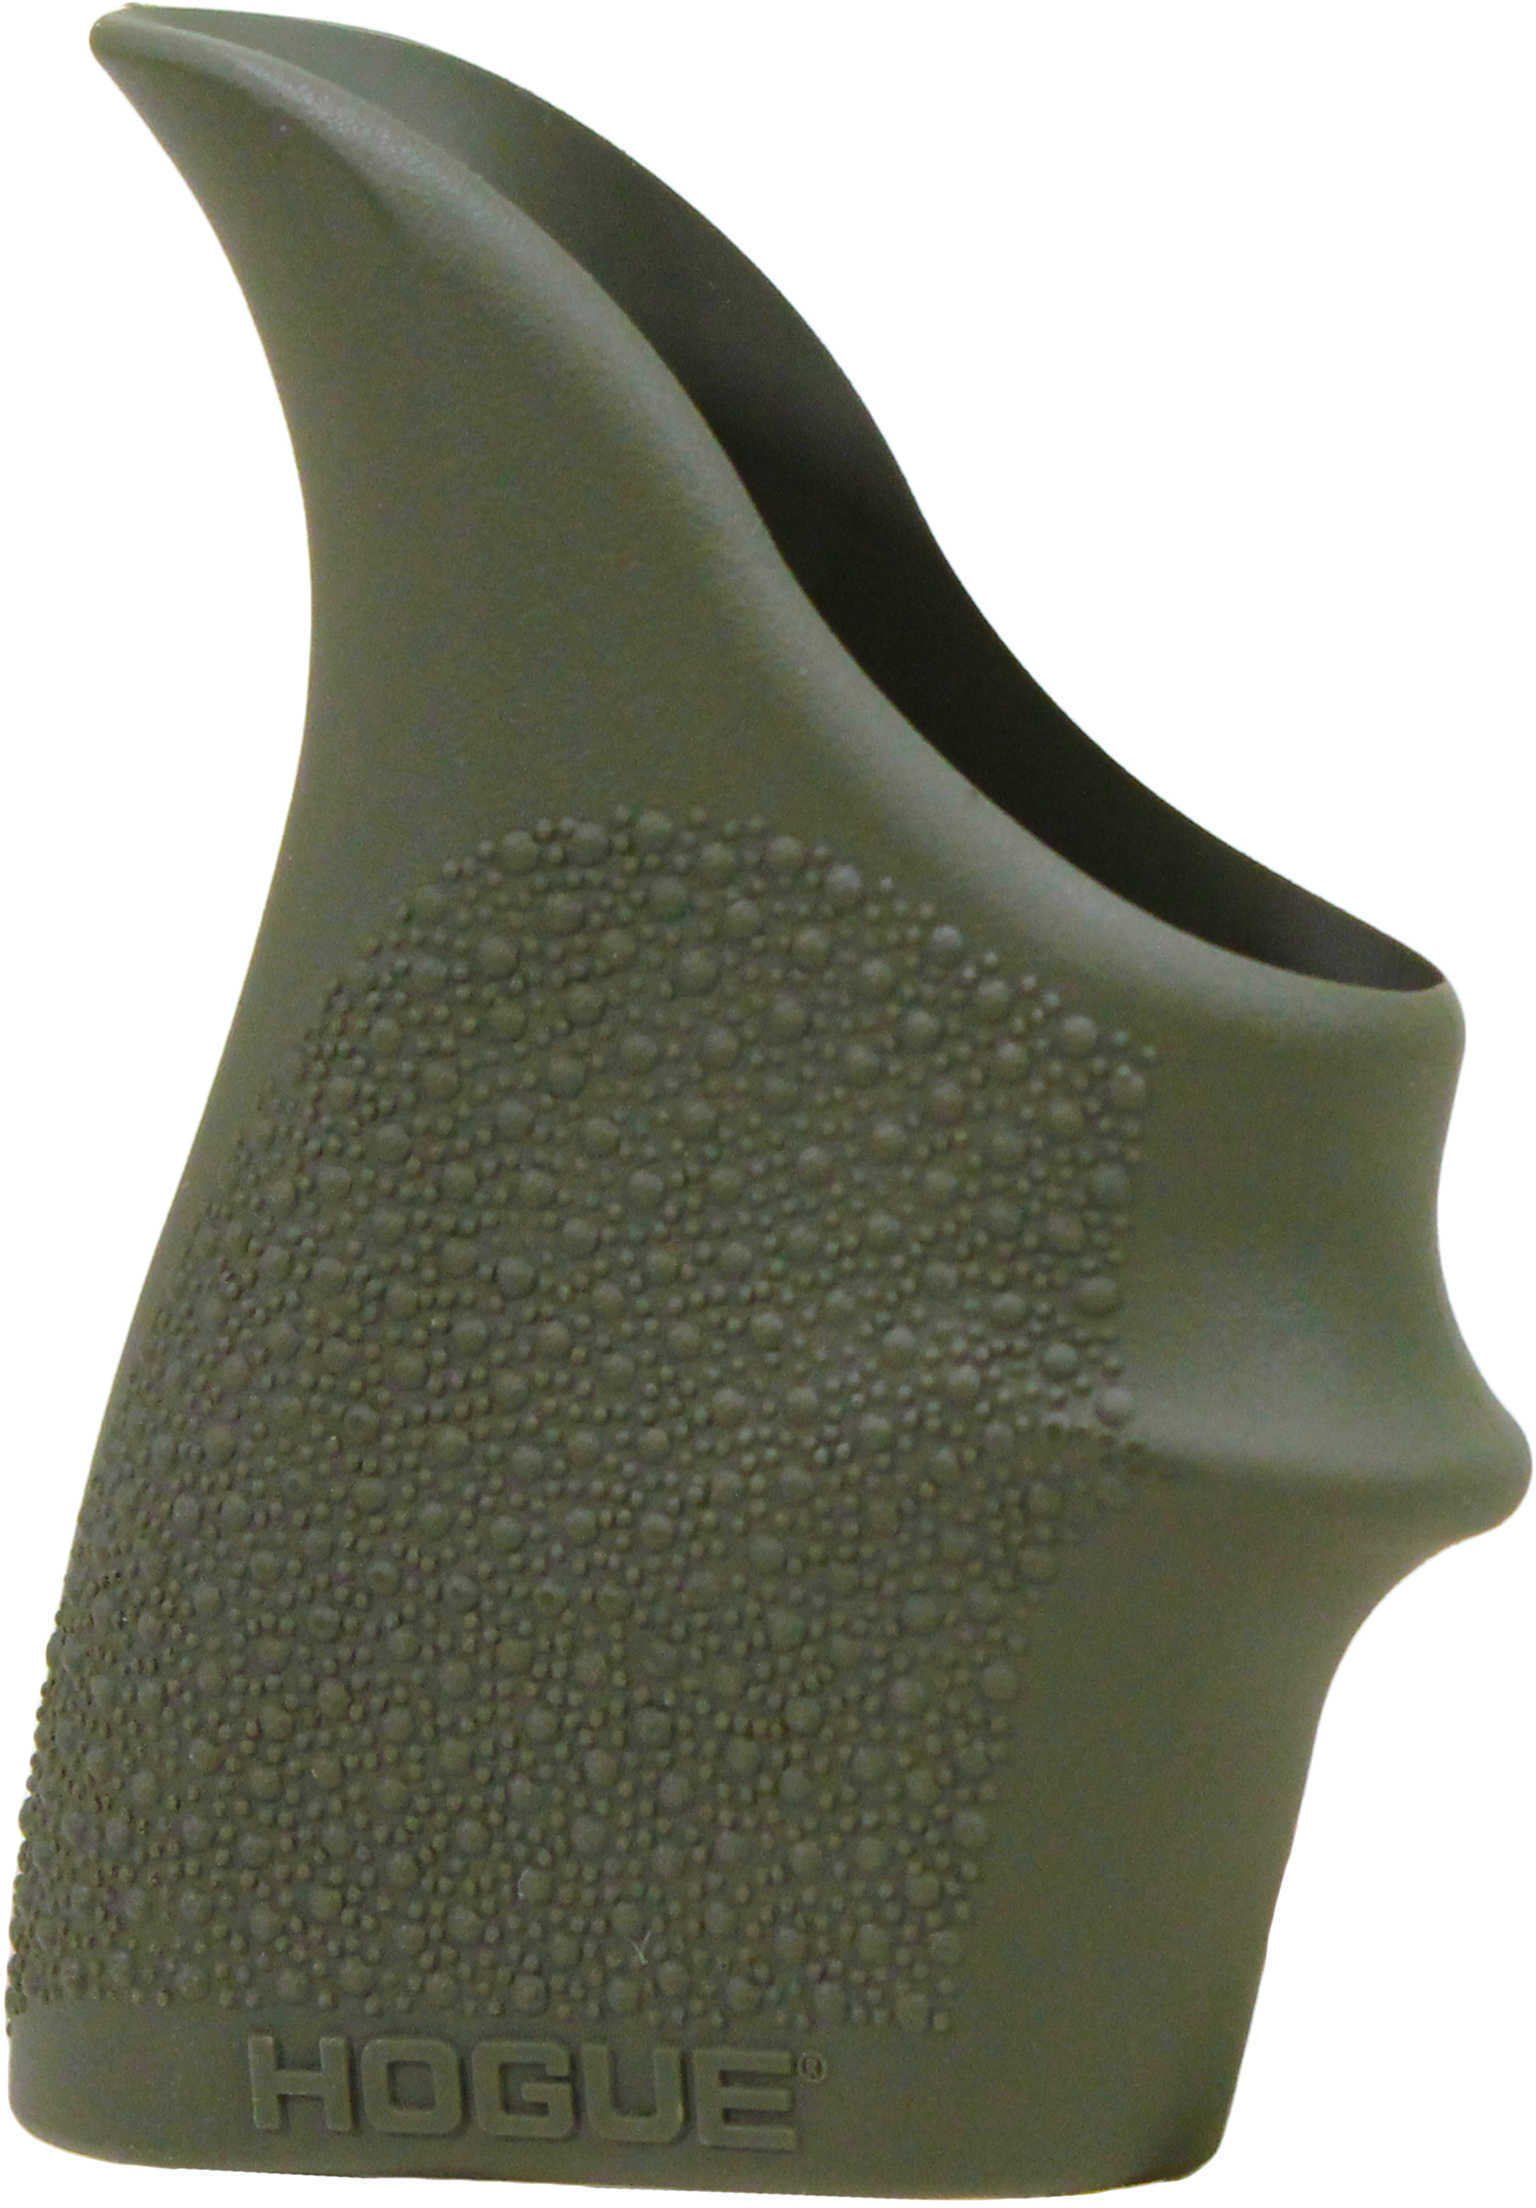 Hogue Grips HandAll Beavertail Fits S&W M&P Shield 45 Kahr P9/P40/CW9/CW/403 Rubber Finger Grooves OD Green 18301